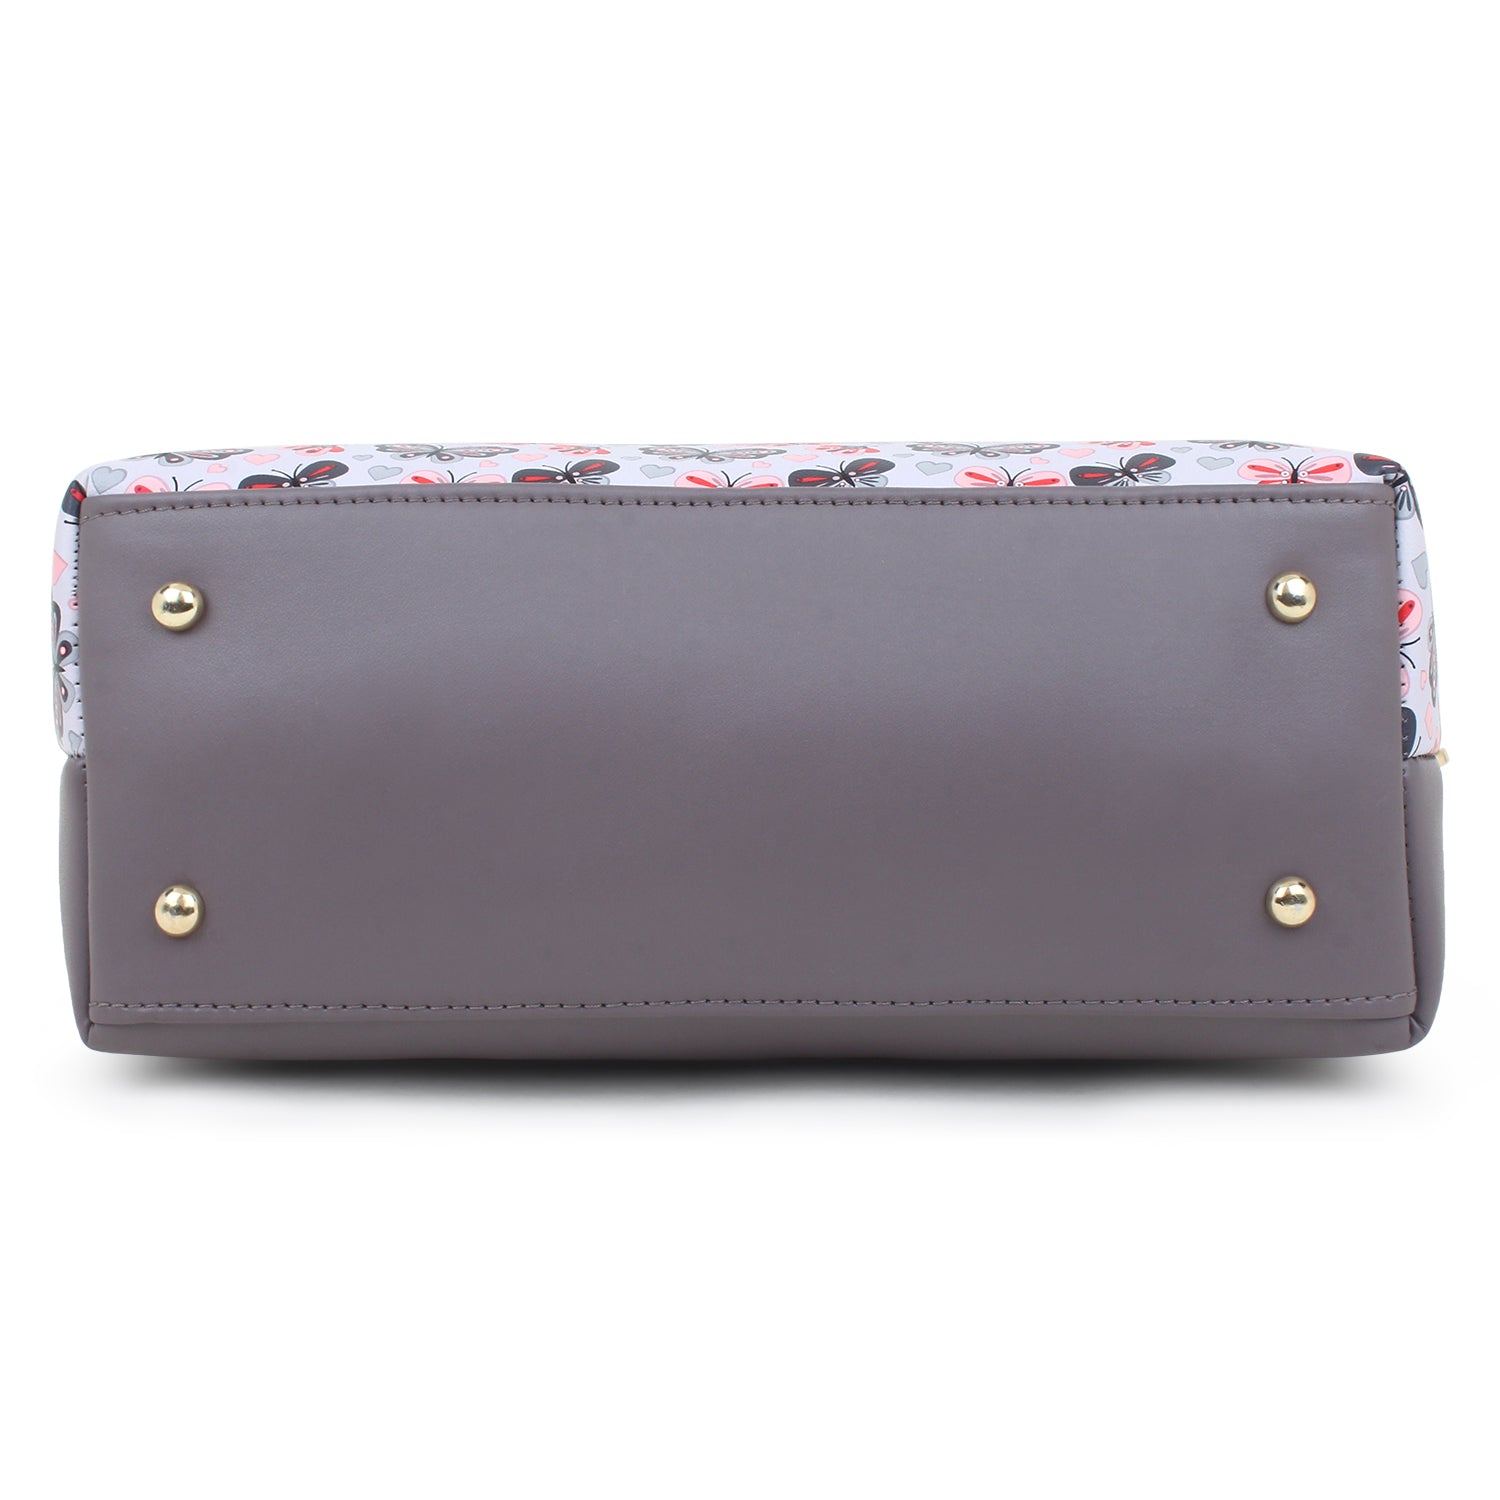 Grey butterfly Printed Structured Sling Bag